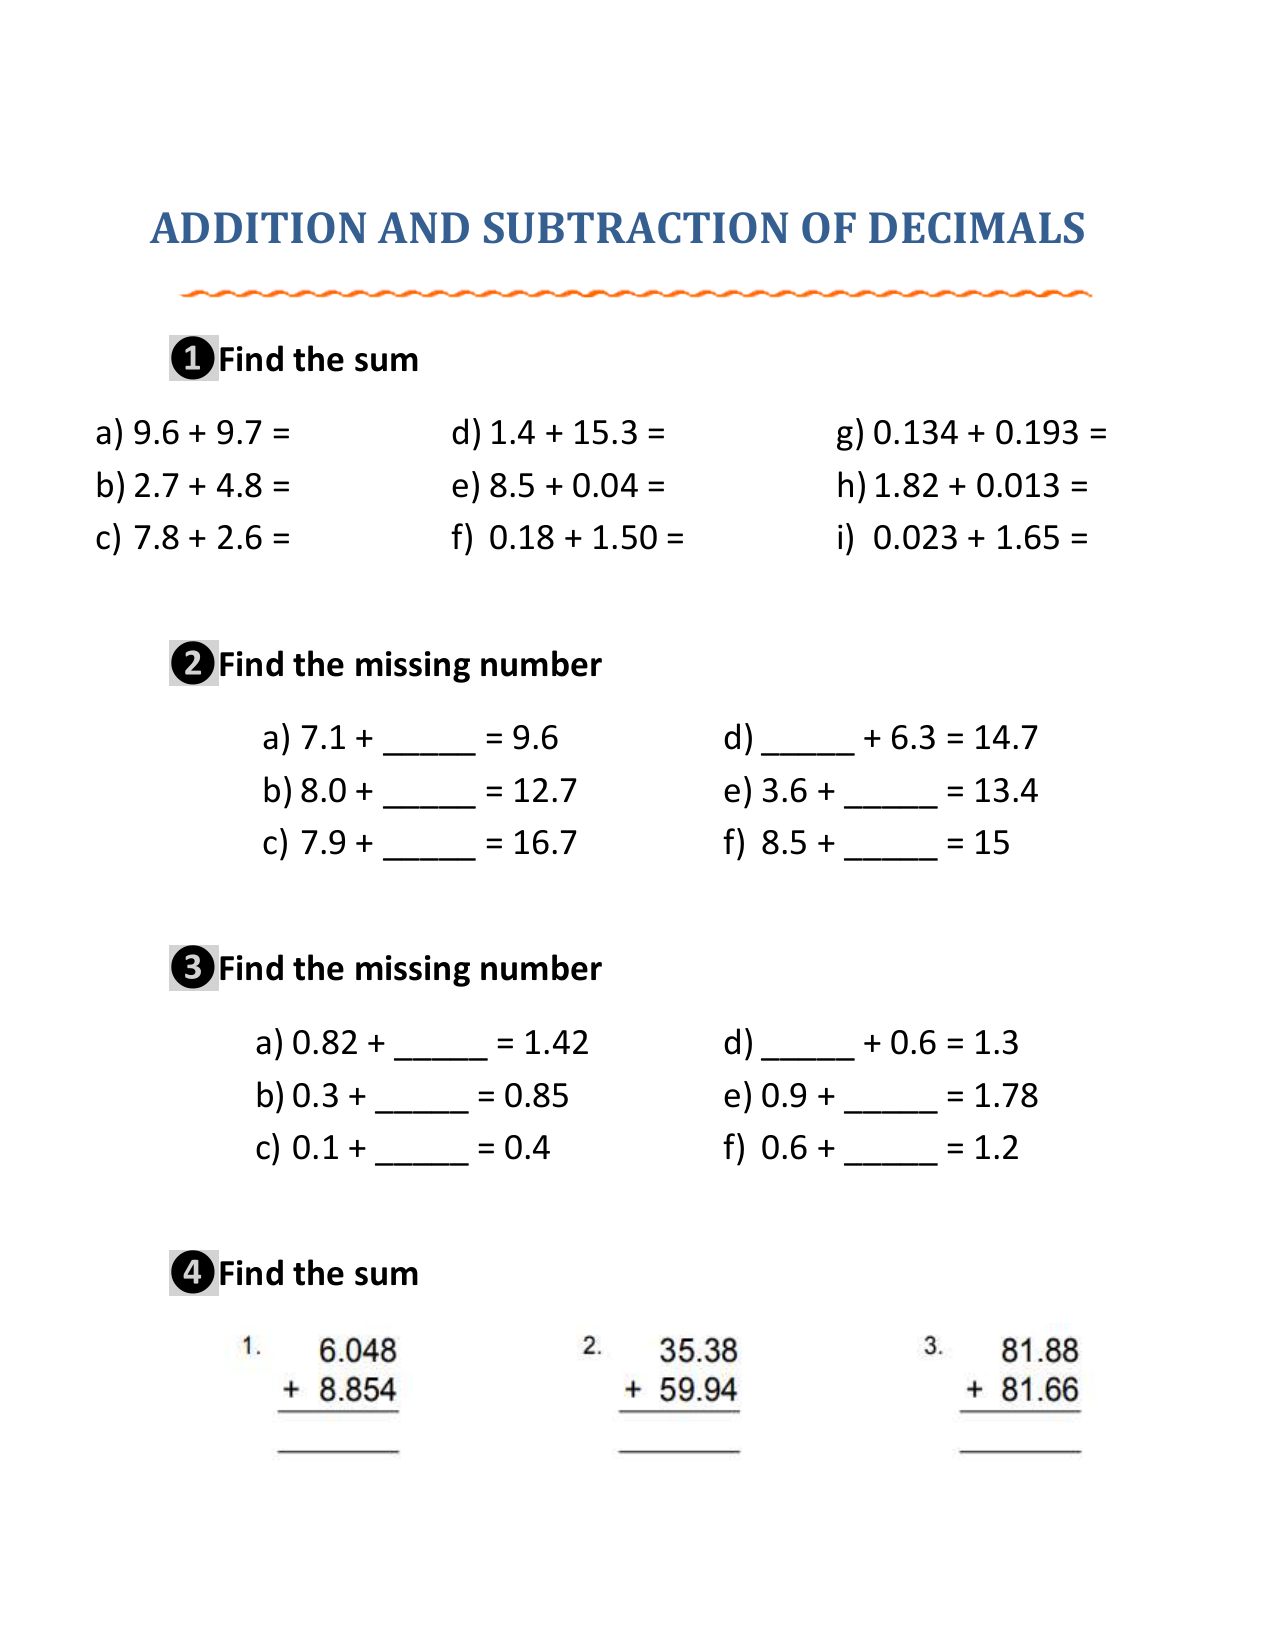 addition-and-subtraction-of-decimals